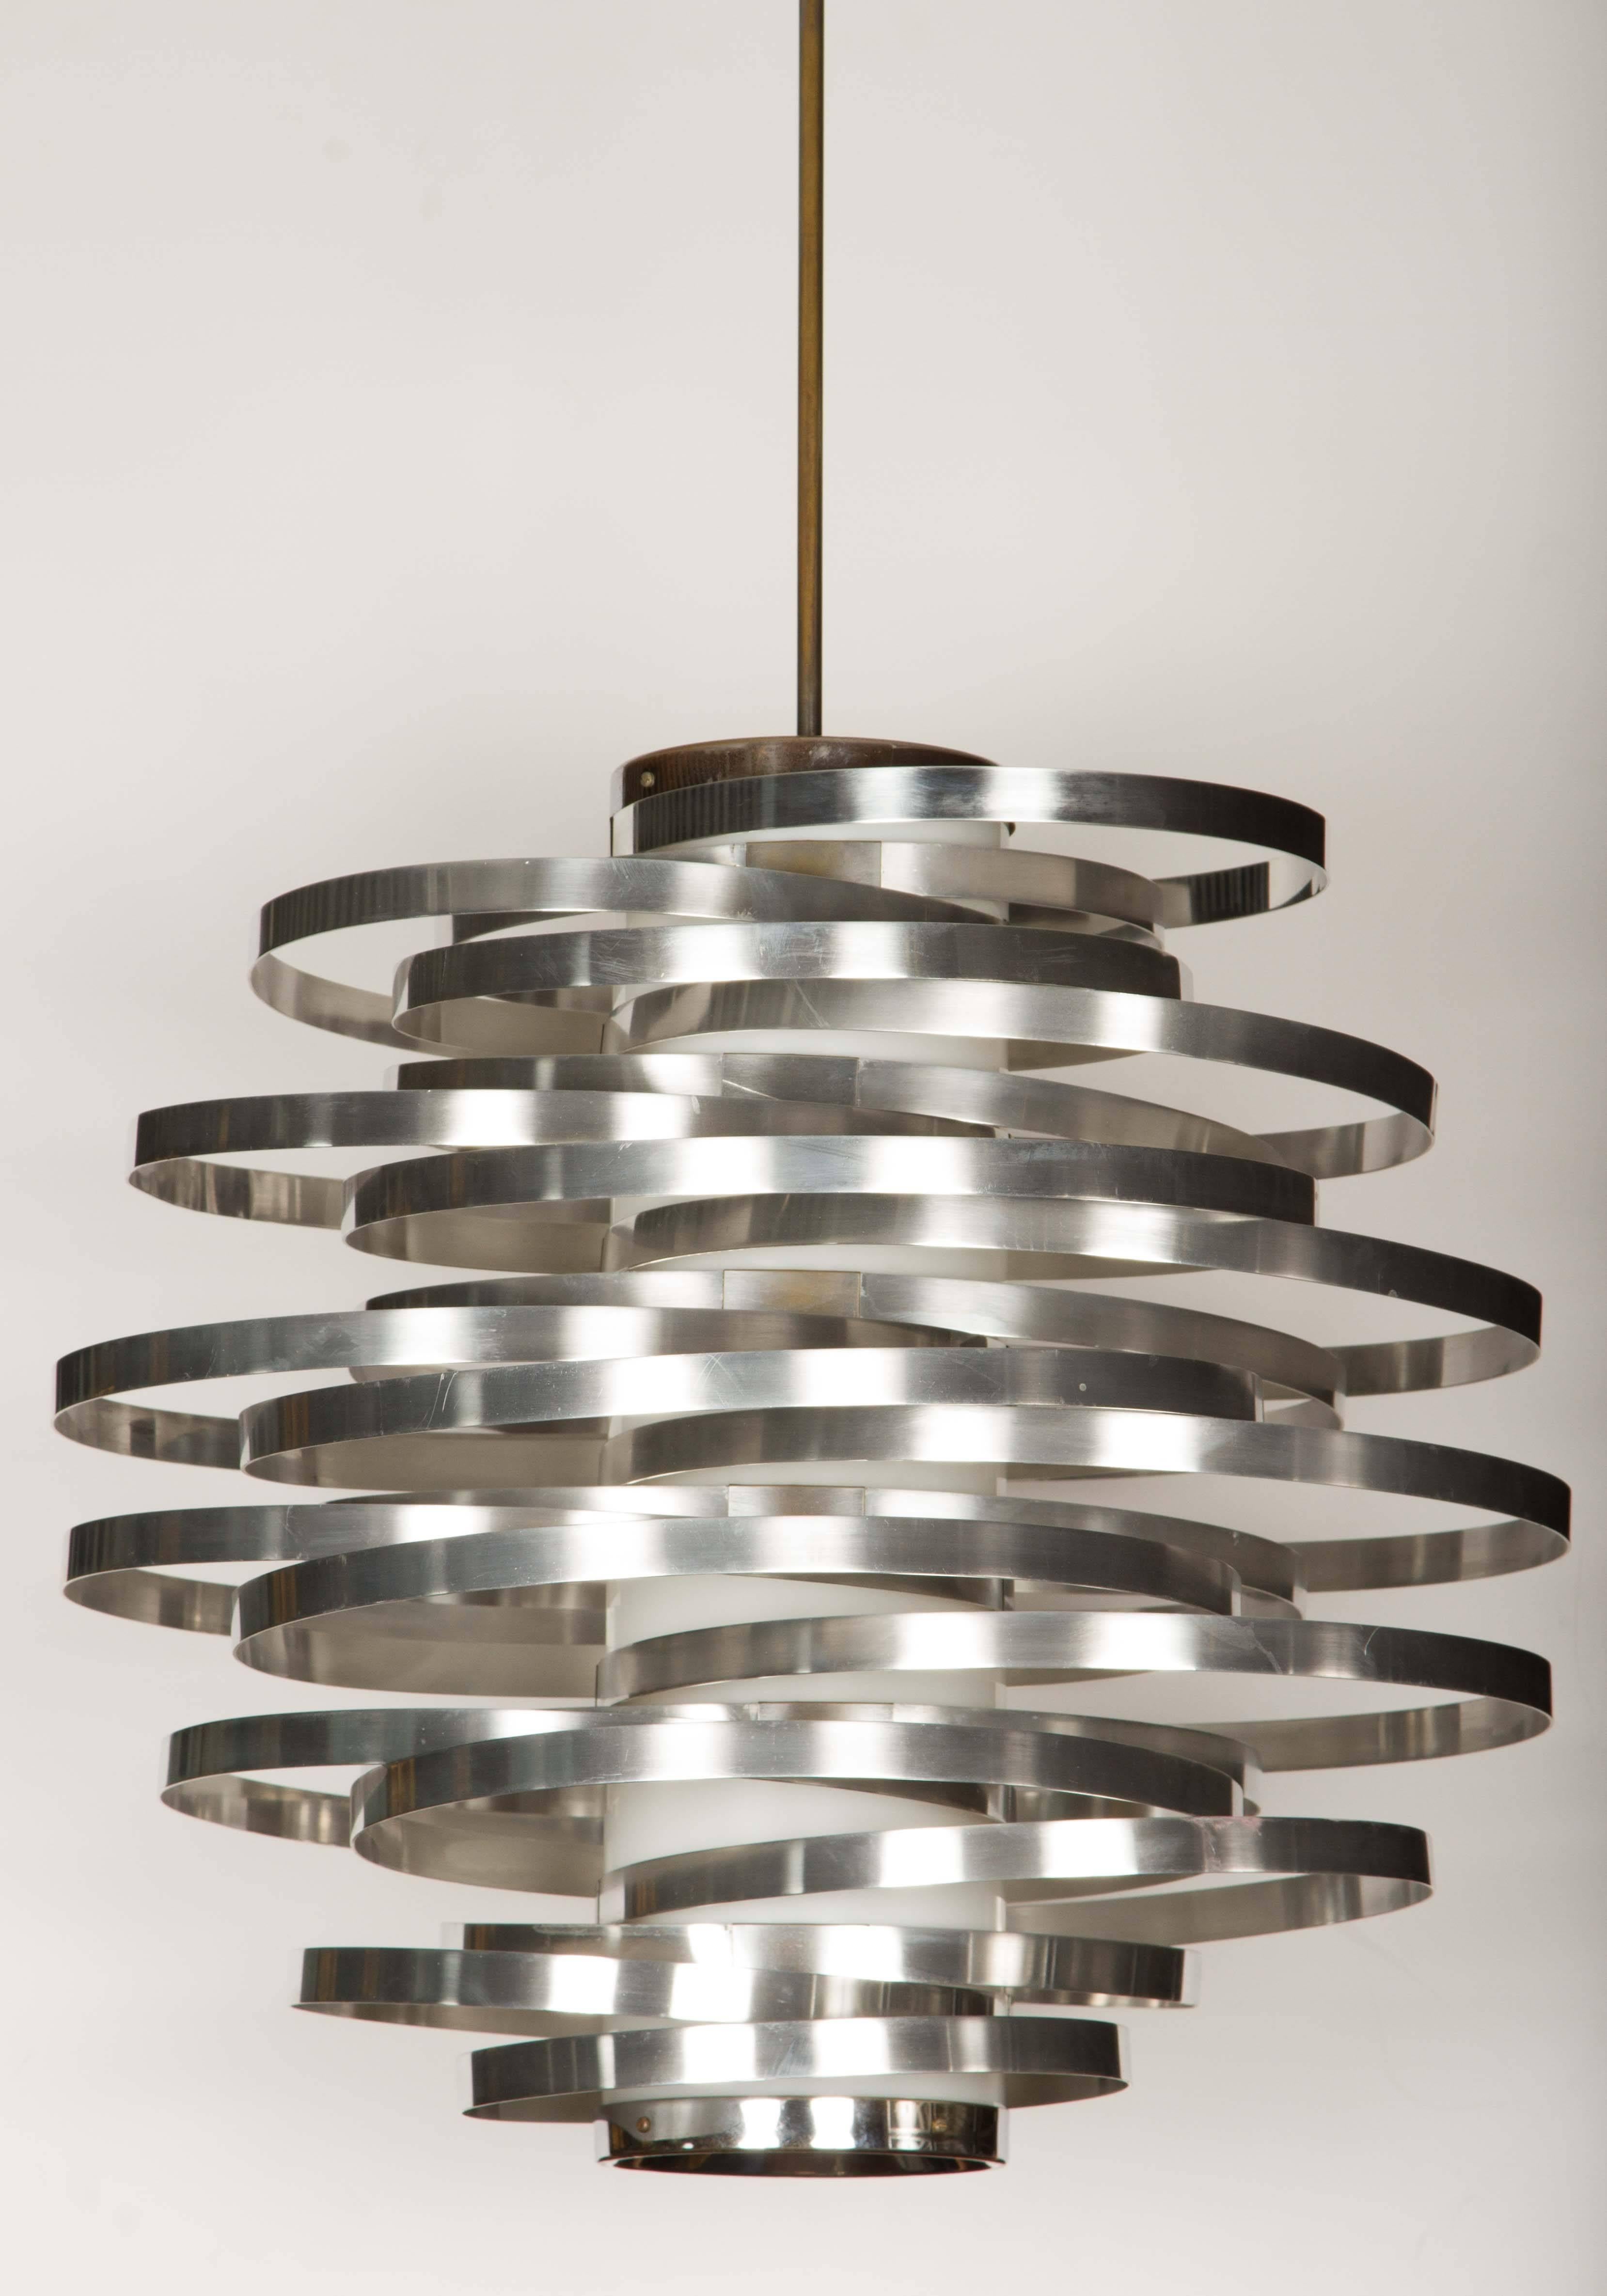 Modernist pendant composed of polished aluminum bands attached to an acrylic central column. Fixture has a double, medium socket light source and has recently been completely restored. Current total drop is: 36”. This is a period example.